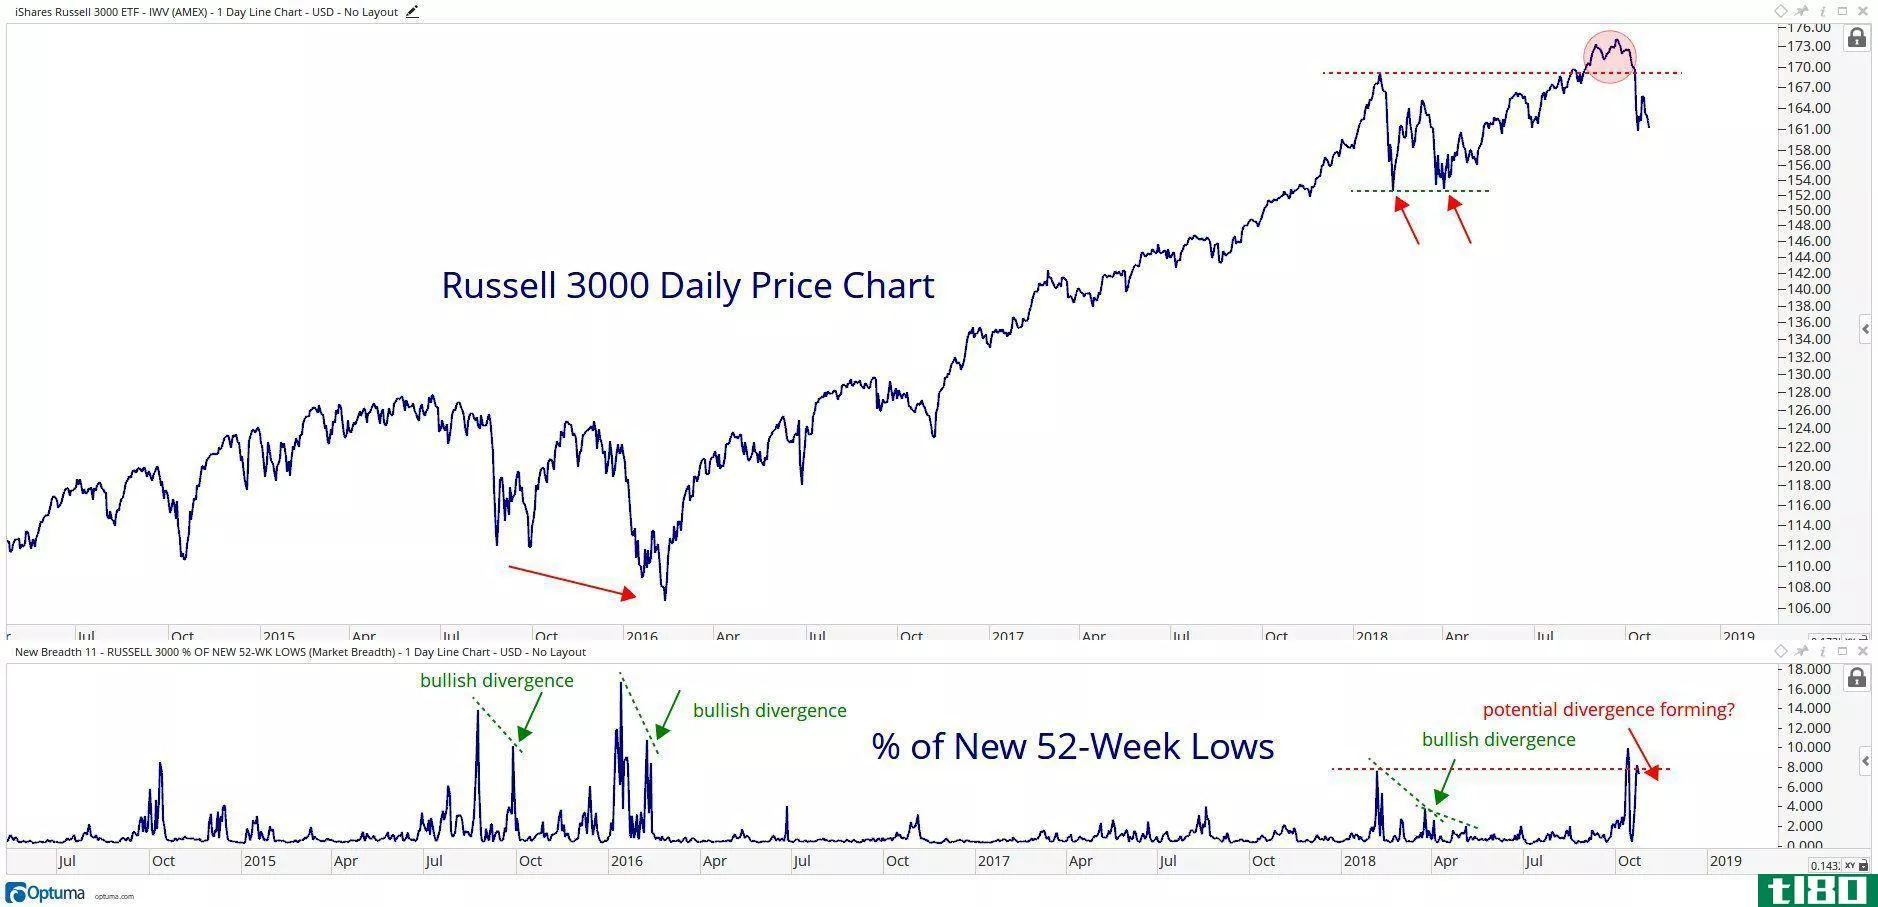 Russell 3000 daily price chart